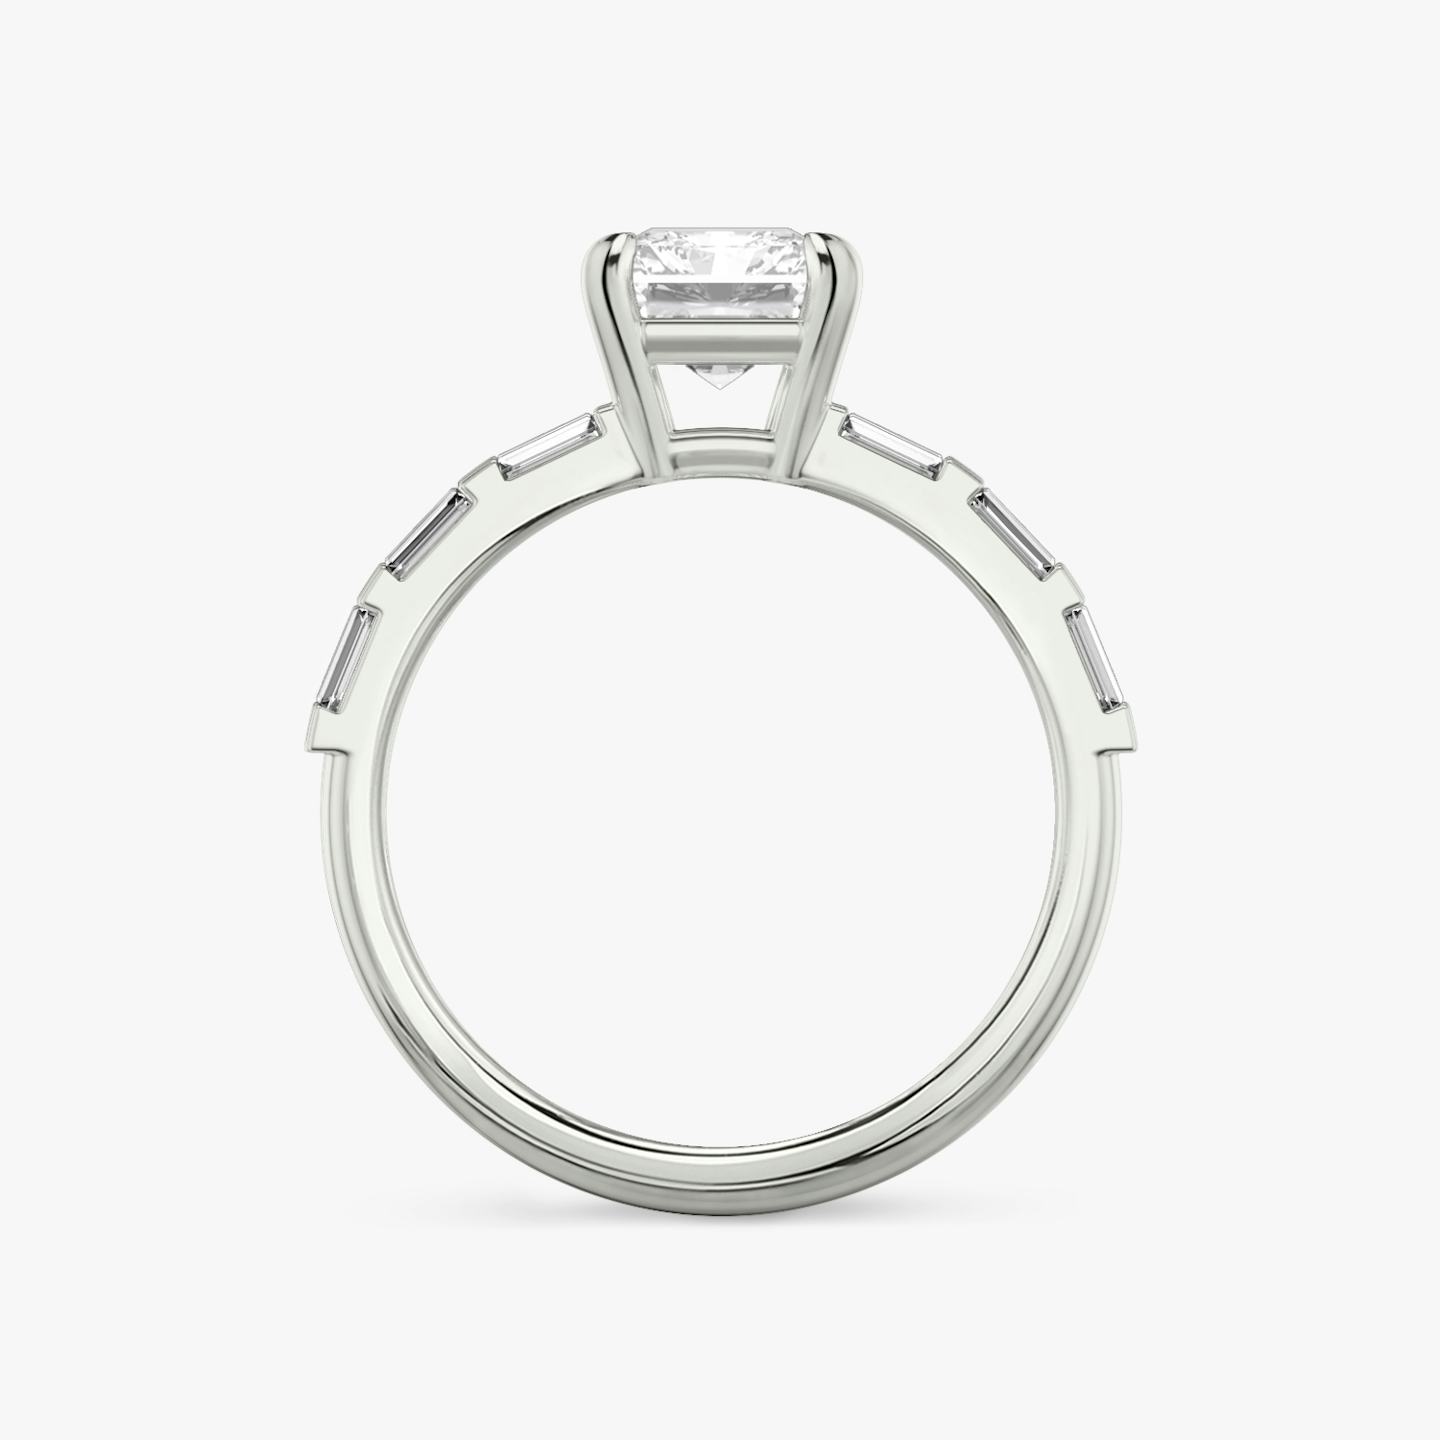 The Double Band | Radiant | Platinum | Band: Pavé | Band stone shape: Baguette | Diamond orientation: vertical | Carat weight: See full inventory